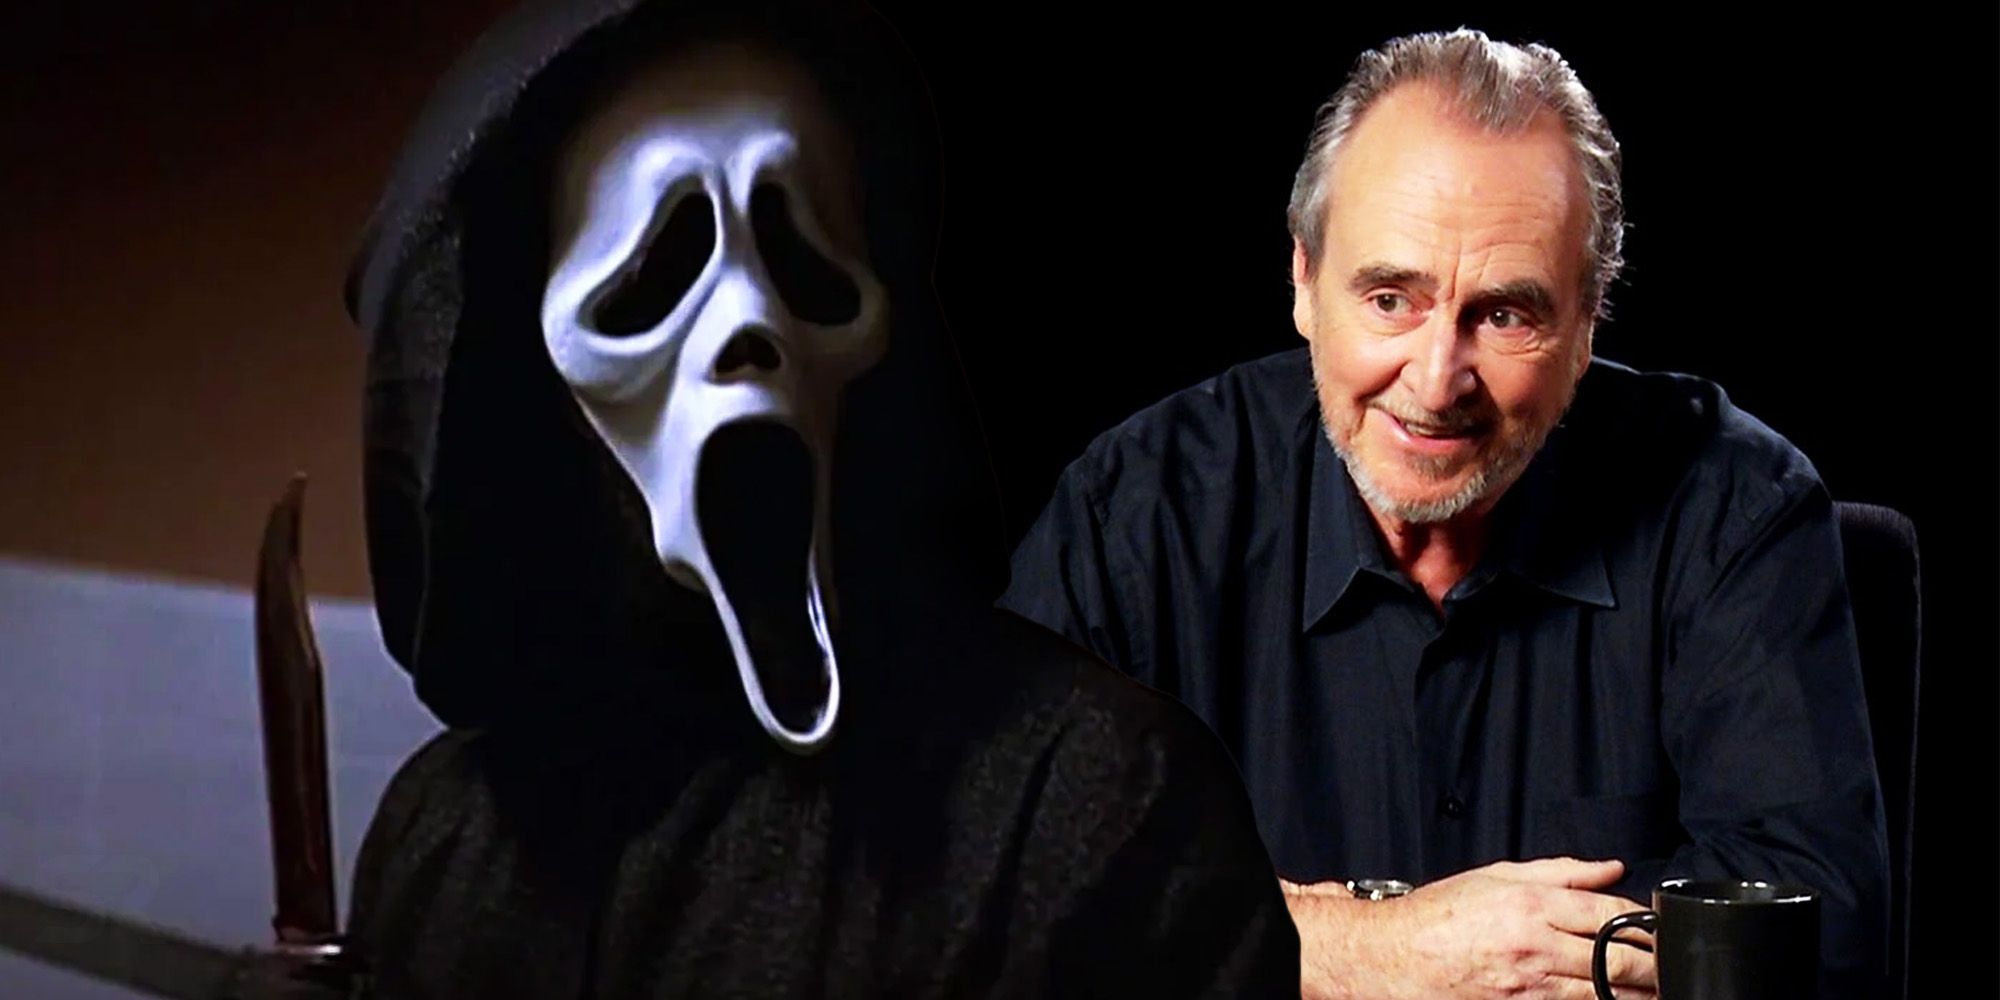 Scream 2022 Theory: This New Character Is The Killer